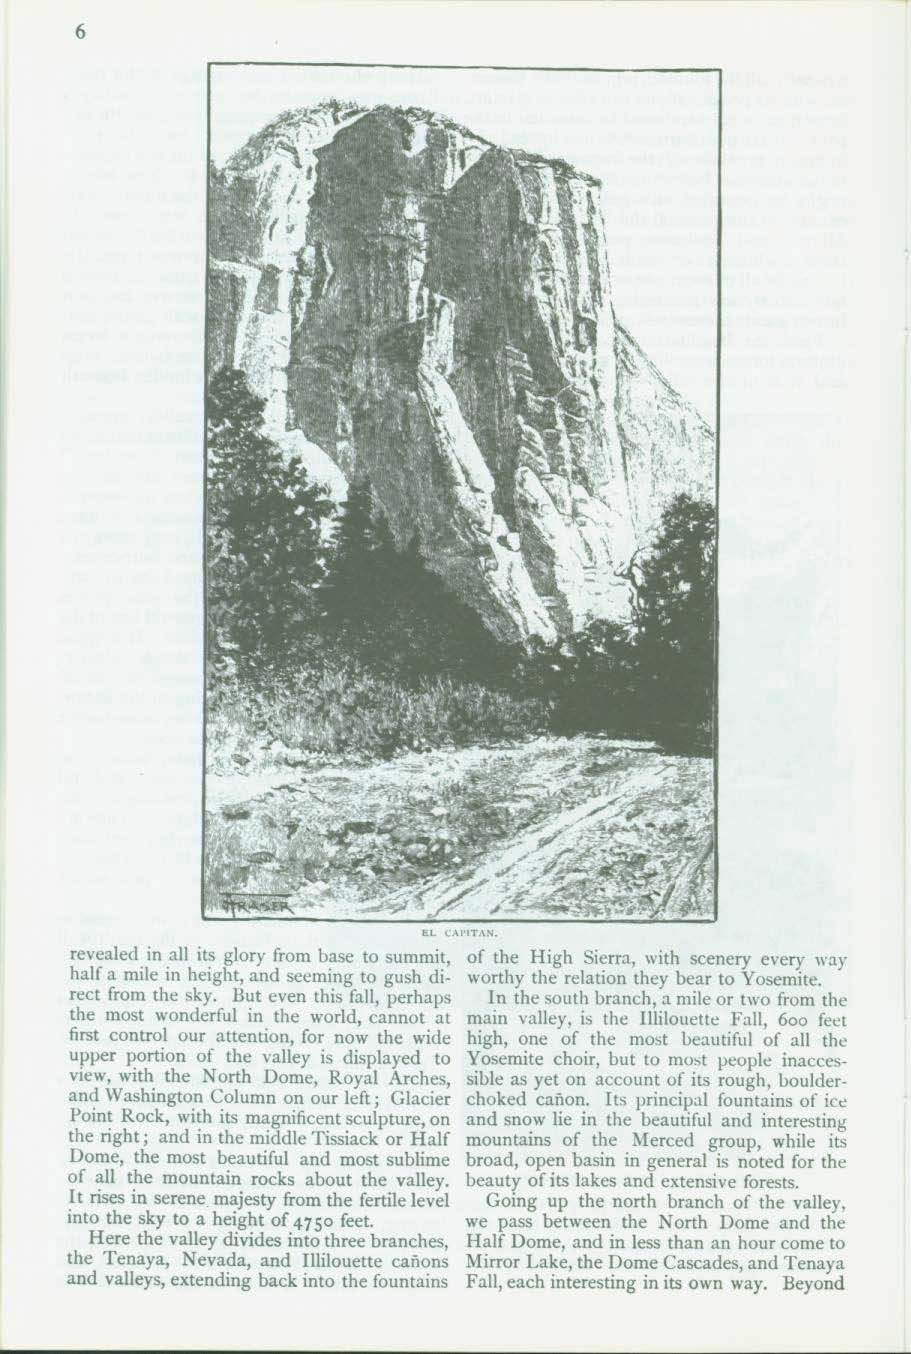 The Proposed Yosemite National Park--treasures & features, 1890. vis0003d